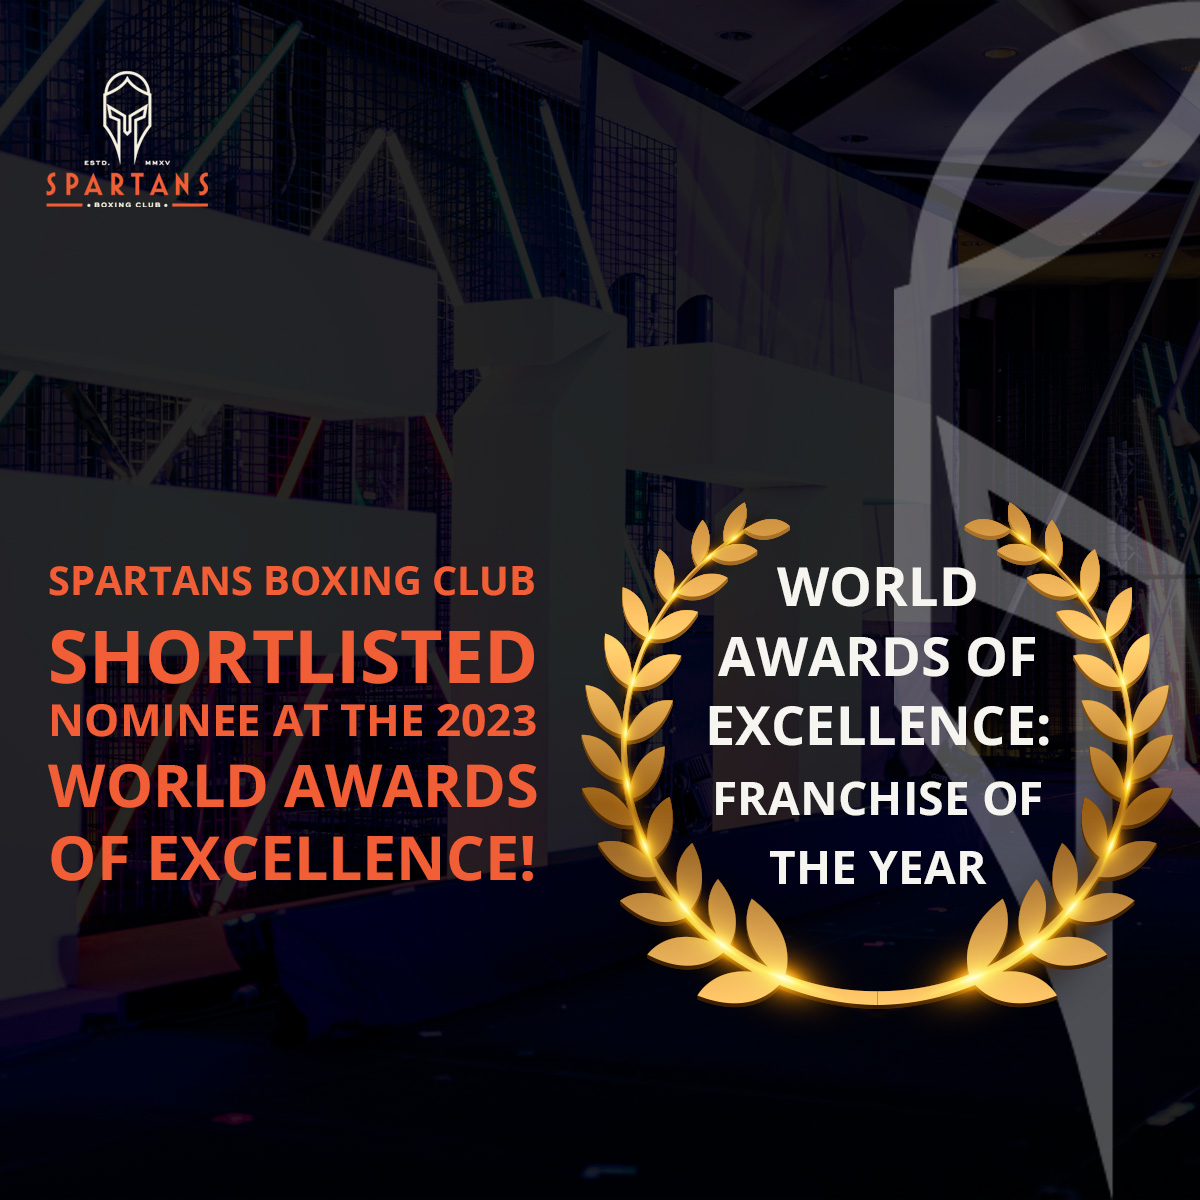 world awards of excellence